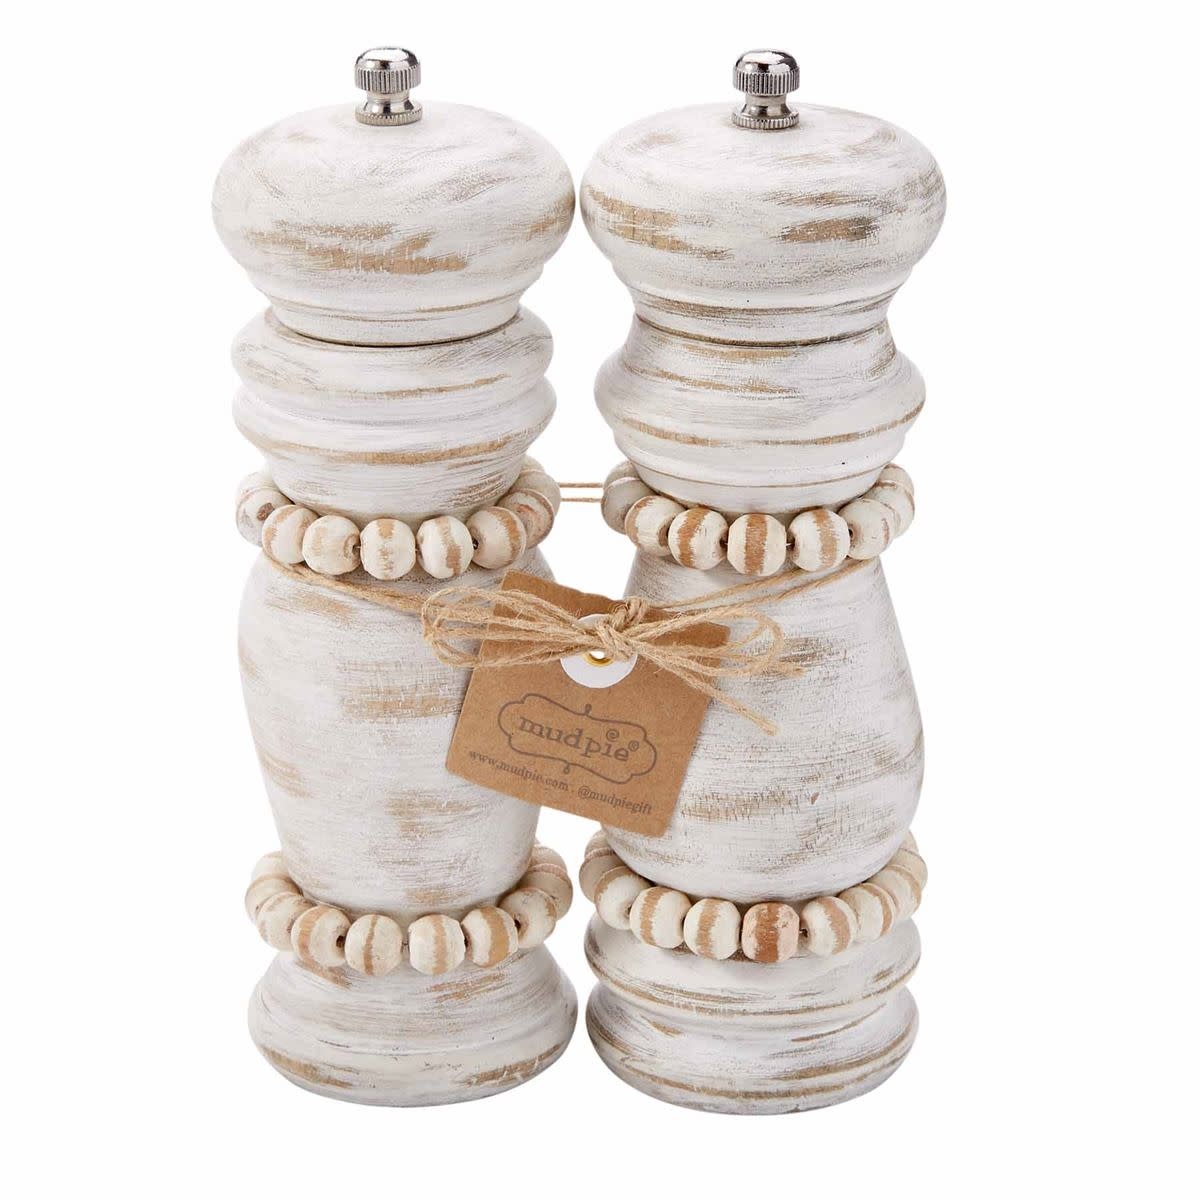 White Wooden Pepper Grinder Set with A Tray, Sea Salt and Pepper Grinders Set, 6” Salt Mills with Tray by Tessie & Jessie (White)